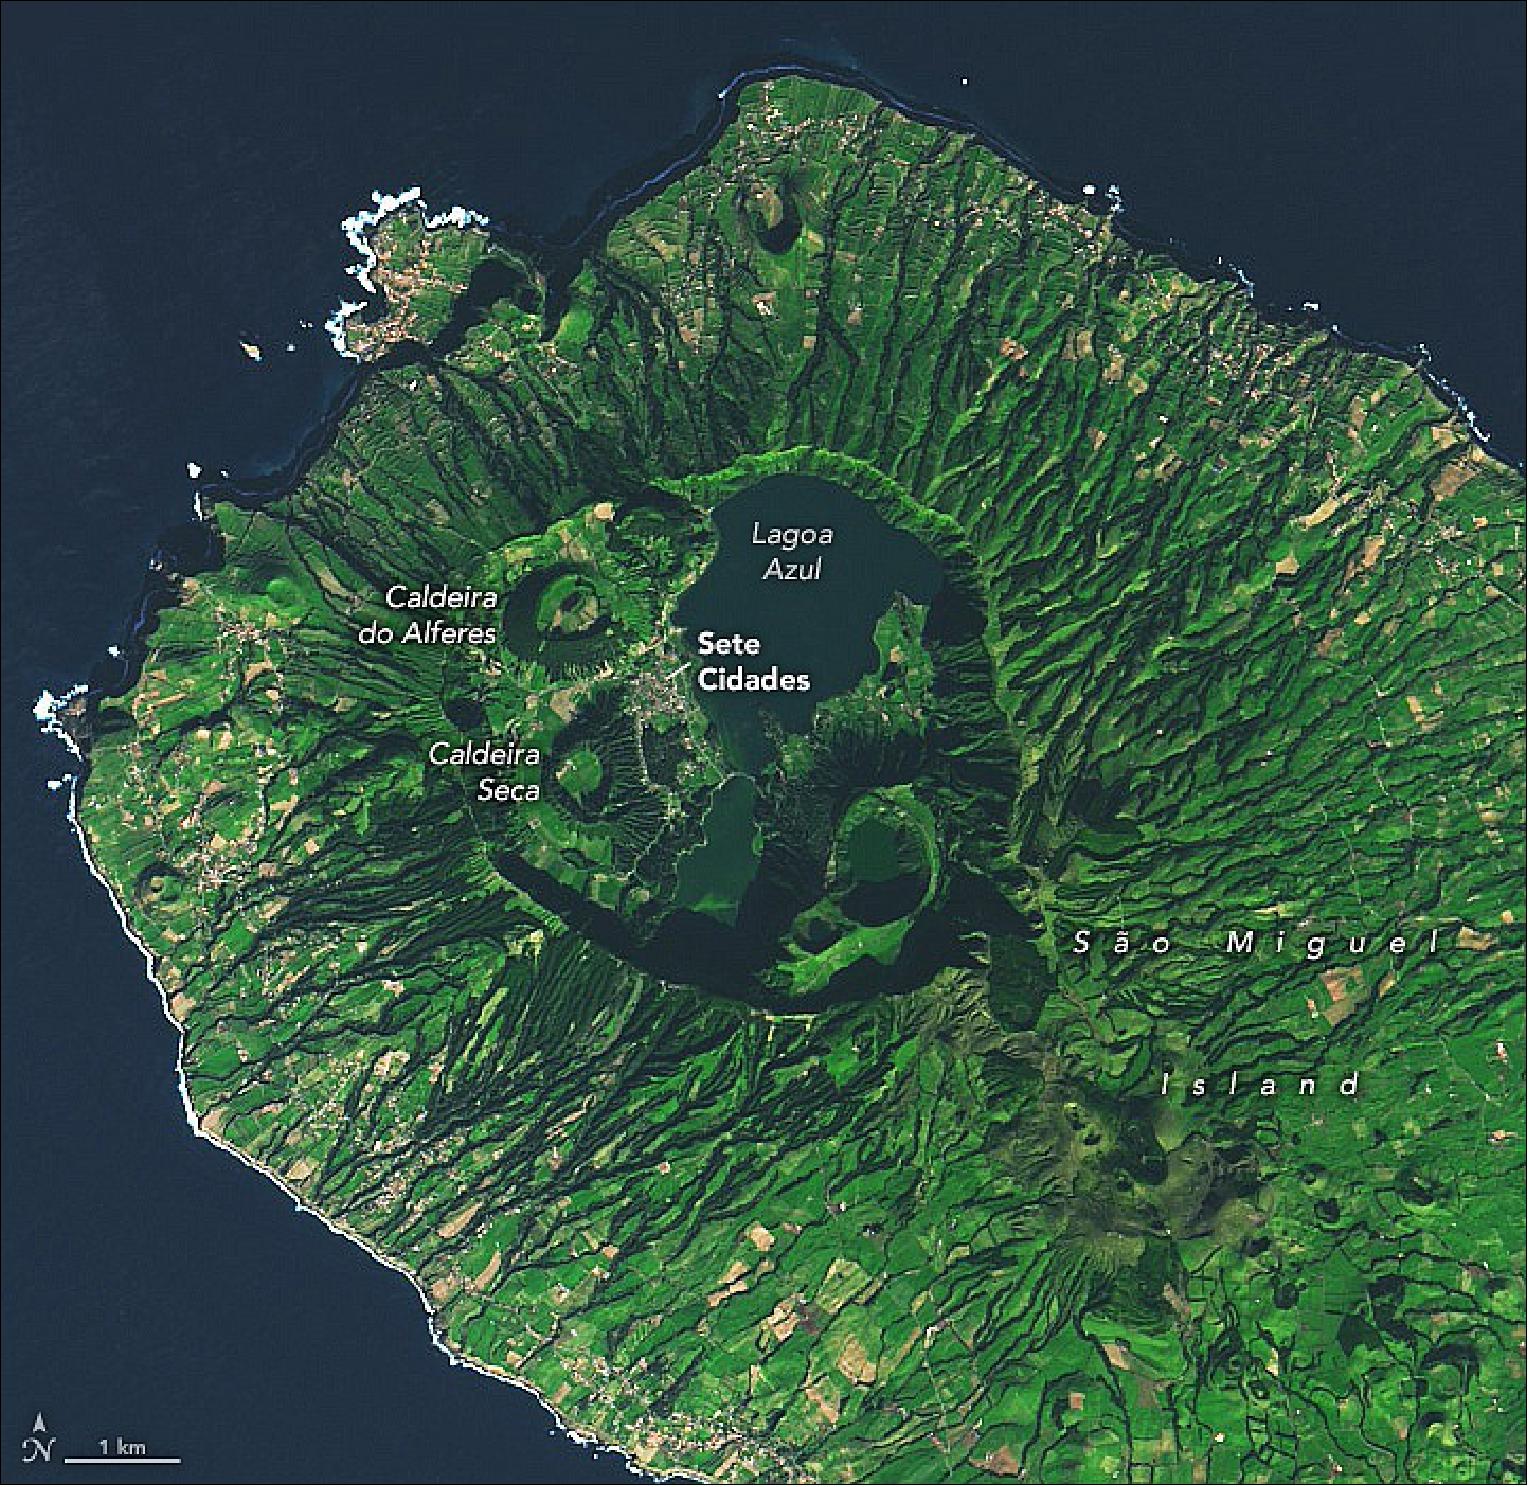 Figure 20: In this detailed view, a series of smaller volcanic cones and two lakes are visible inside the caldera of Sete Cidades. The summit caldera, about 5 km (3 miles) wide and 400 m (1,300 feet) deep, formed when the summit collapsed about 22,000 years ago. Two other volcanic cones also appear in the image: Caldeira do Alfreres, which formed during an eruption around 2050 BCE, and Caldeira Seca, which last erupted in 1444 (image credit: NASA Earth Observatory)